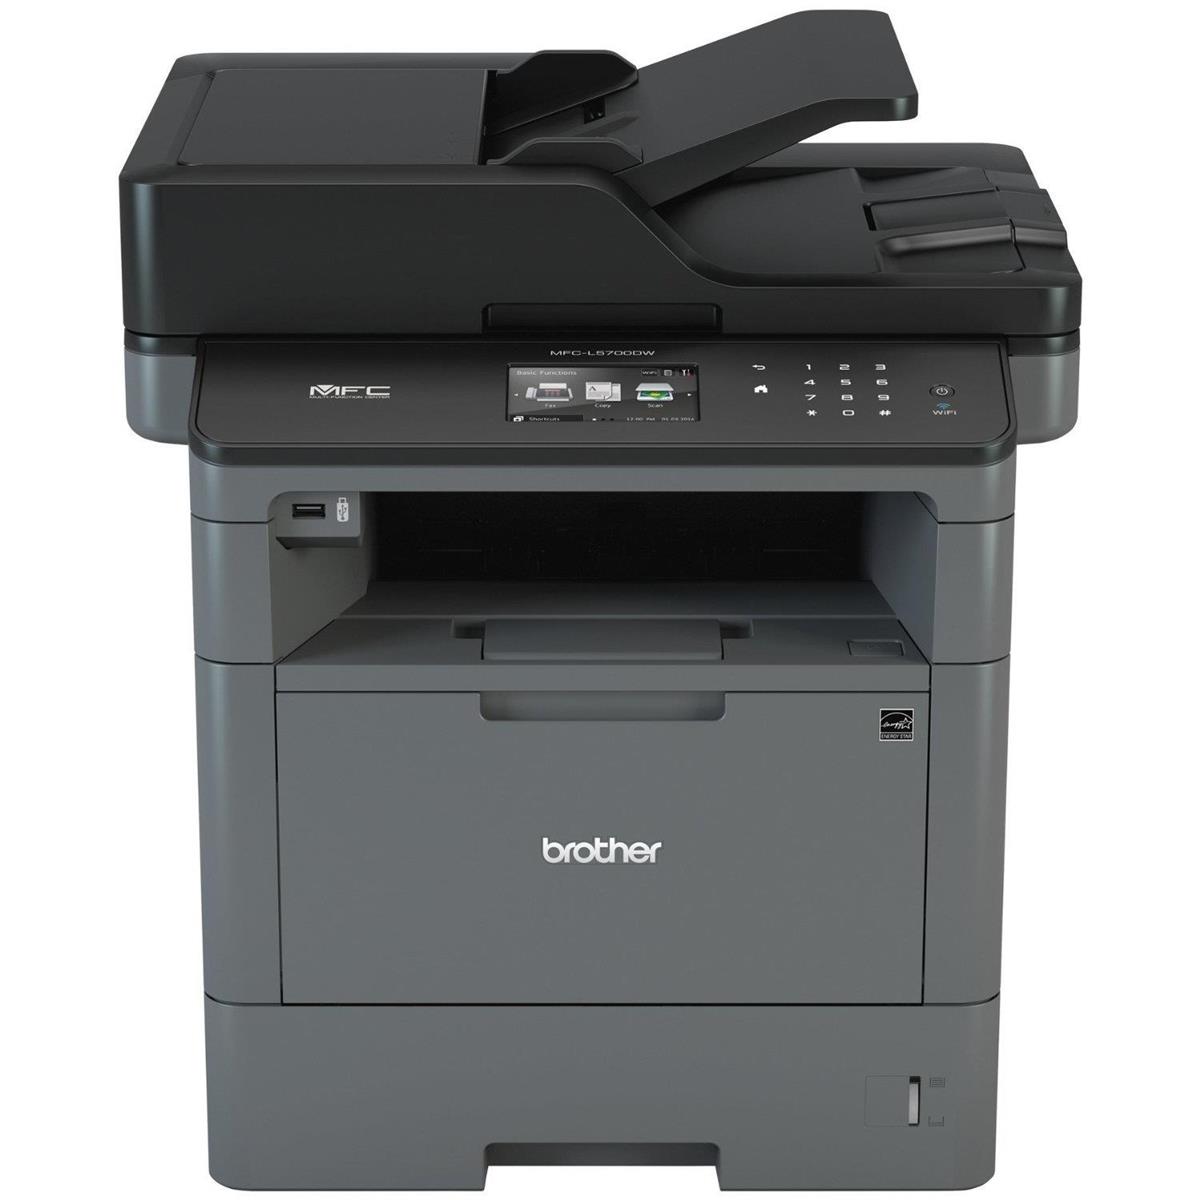 Image of Brother MFC-L5700DW All-in-One Monochrome Laser Printer